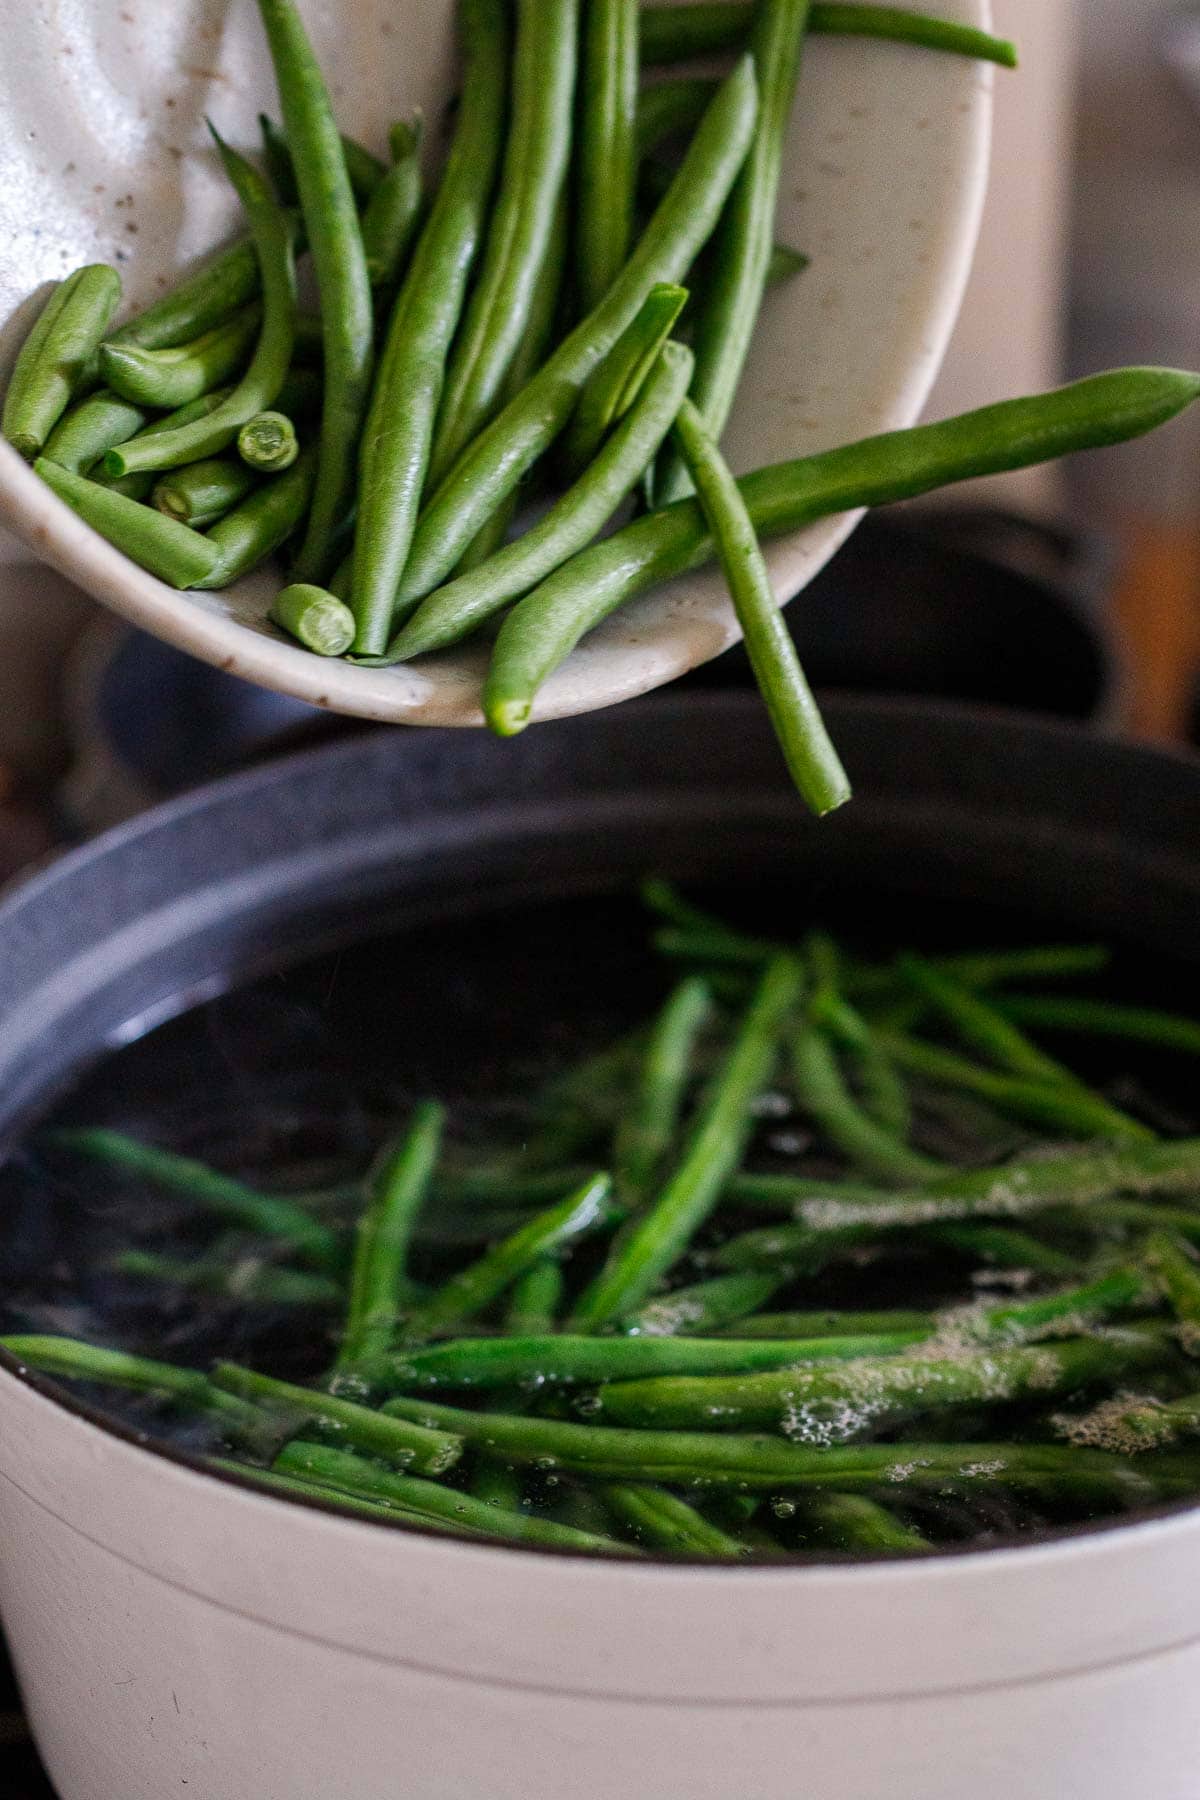 trimmed green beans tossed into pot of boiling water